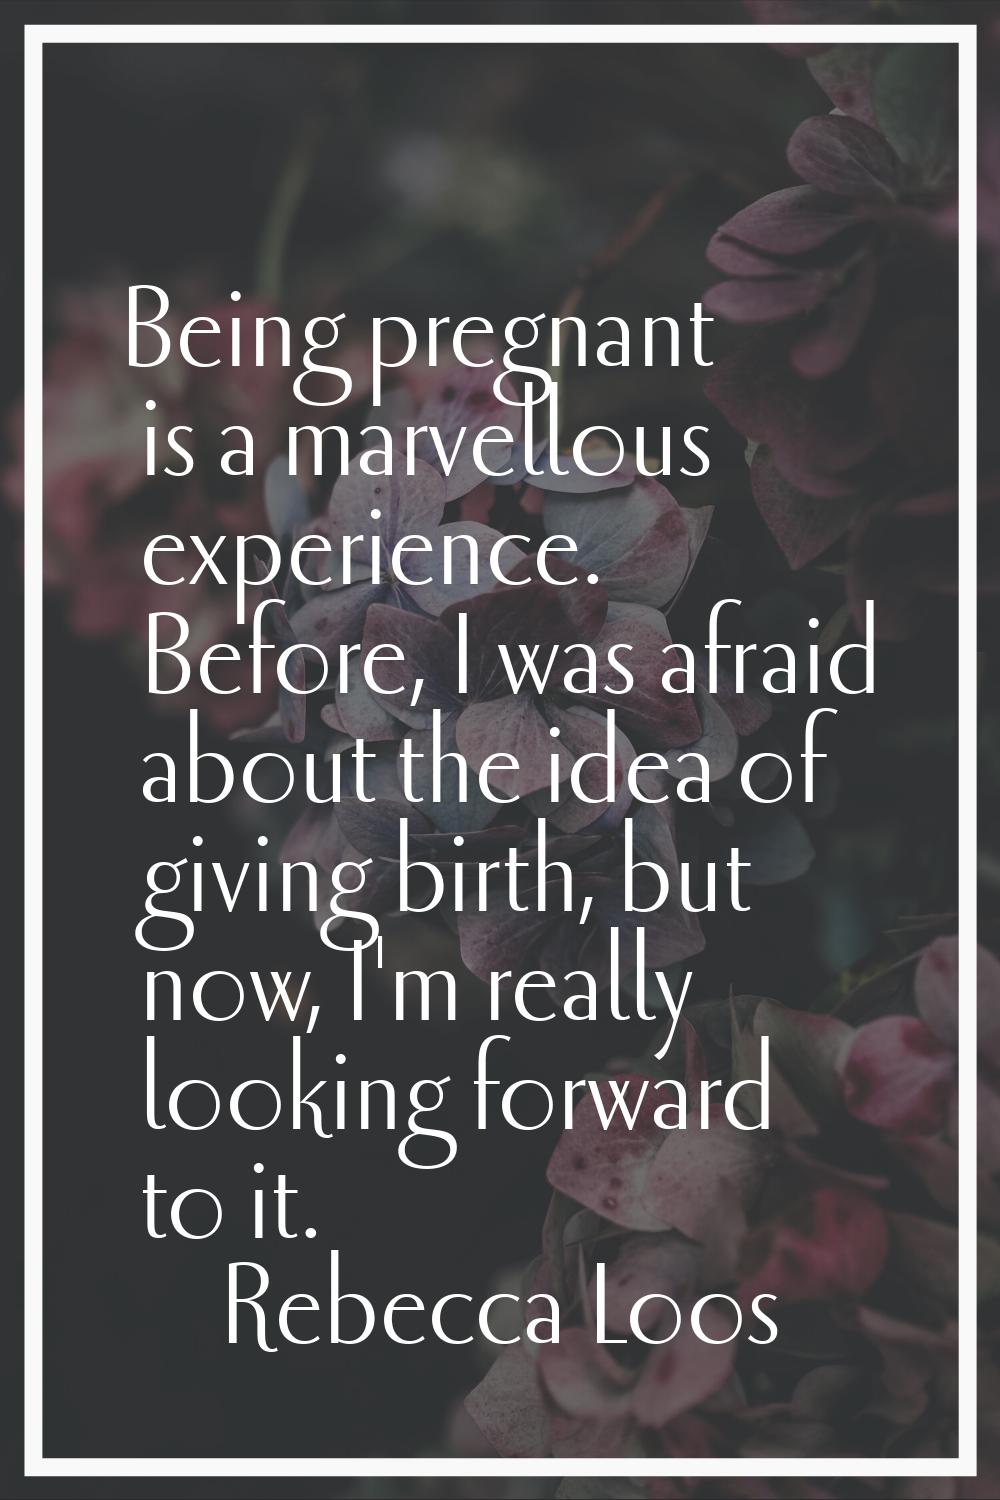 Being pregnant is a marvellous experience. Before, I was afraid about the idea of giving birth, but